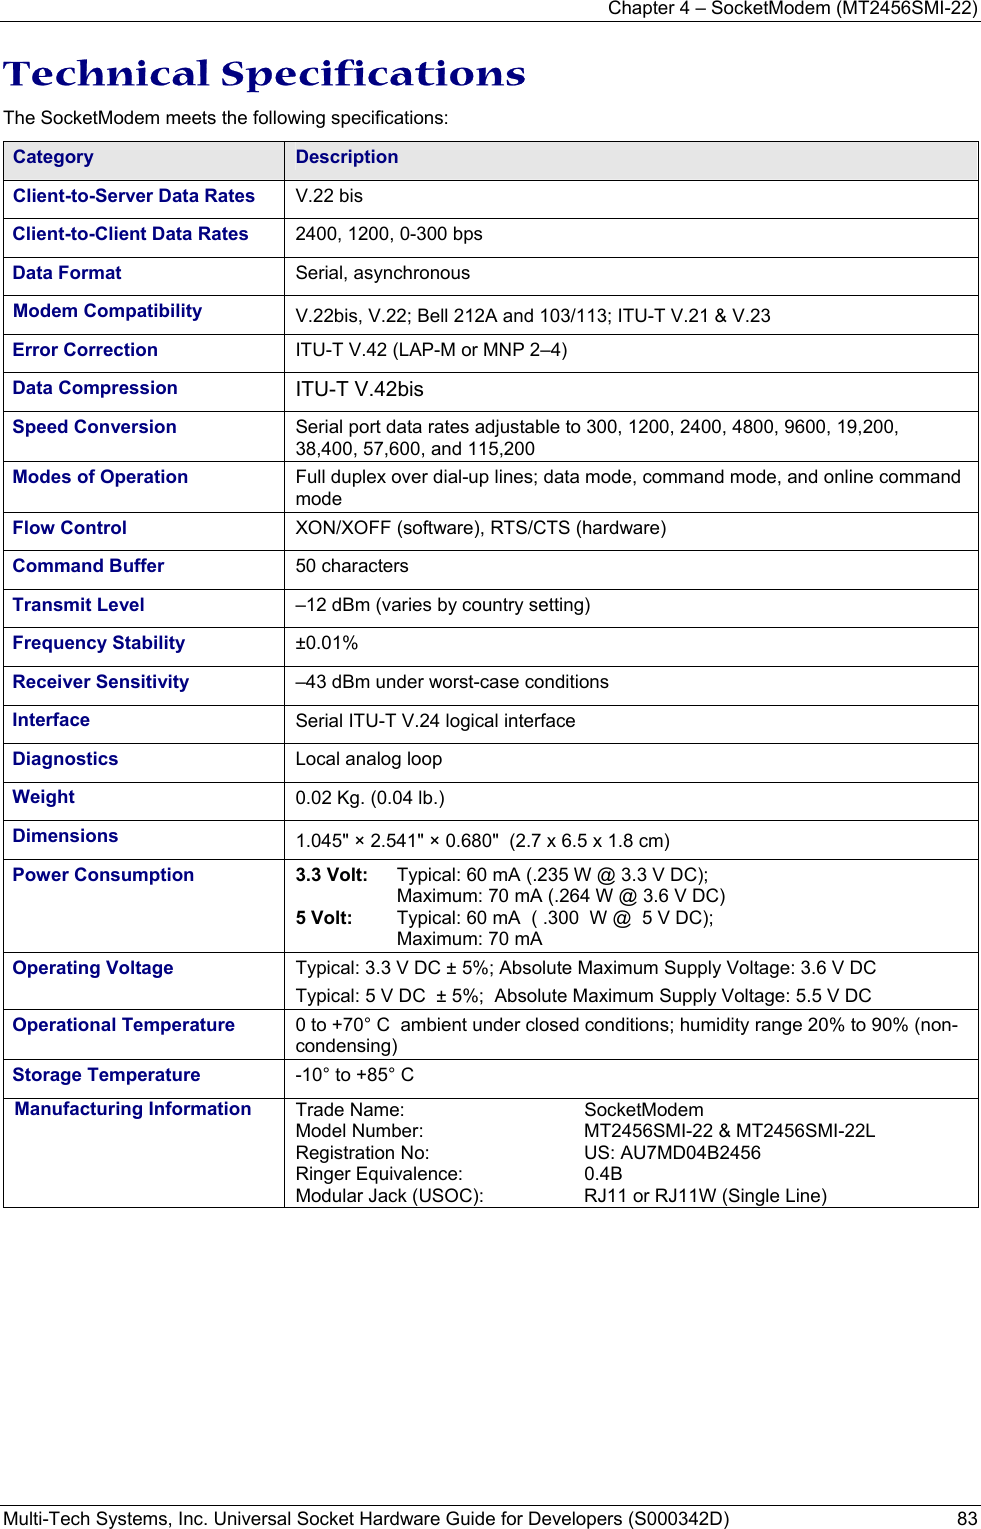 Chapter 4 – SocketModem (MT2456SMI-22) Multi-Tech Systems, Inc. Universal Socket Hardware Guide for Developers (S000342D)  83  Technical Specifications The SocketModem meets the following specifications:  Category  Description Client-to-Server Data Rates  V.22 bis Client-to-Client Data Rates  2400, 1200, 0-300 bps Data Format  Serial, asynchronous Modem Compatibility  V.22bis, V.22; Bell 212A and 103/113; ITU-T V.21 &amp; V.23  Error Correction  ITU-T V.42 (LAP-M or MNP 2–4) Data Compression  ITU-T V.42bis  Speed Conversion   Serial port data rates adjustable to 300, 1200, 2400, 4800, 9600, 19,200, 38,400, 57,600, and 115,200 Modes of Operation  Full duplex over dial-up lines; data mode, command mode, and online command mode Flow Control  XON/XOFF (software), RTS/CTS (hardware) Command Buffer  50 characters Transmit Level  –12 dBm (varies by country setting) Frequency Stability  ±0.01% Receiver Sensitivity  –43 dBm under worst-case conditions Interface  Serial ITU-T V.24 logical interface Diagnostics  Local analog loop Weight  0.02 Kg. (0.04 lb.) Dimensions  1.045&quot; × 2.541&quot; × 0.680&quot;  (2.7 x 6.5 x 1.8 cm) Power Consumption   3.3 Volt:   Typical: 60 mA (.235 W @ 3.3 V DC);   Maximum: 70 mA (.264 W @ 3.6 V DC) 5 Volt:  Typical: 60 mA  ( .300  W @  5 V DC);   Maximum: 70 mA Operating Voltage  Typical: 3.3 V DC ± 5%; Absolute Maximum Supply Voltage: 3.6 V DC Typical: 5 V DC  ± 5%;  Absolute Maximum Supply Voltage: 5.5 V DC Operational Temperature   0 to +70° C  ambient under closed conditions; humidity range 20% to 90% (non-condensing) Storage Temperature  -10° to +85° C Manufacturing Information  Trade Name:  SocketModem  Model Number:  MT2456SMI-22 &amp; MT2456SMI-22L Registration No:  US: AU7MD04B2456 Ringer Equivalence:  0.4B Modular Jack (USOC):  RJ11 or RJ11W (Single Line) 